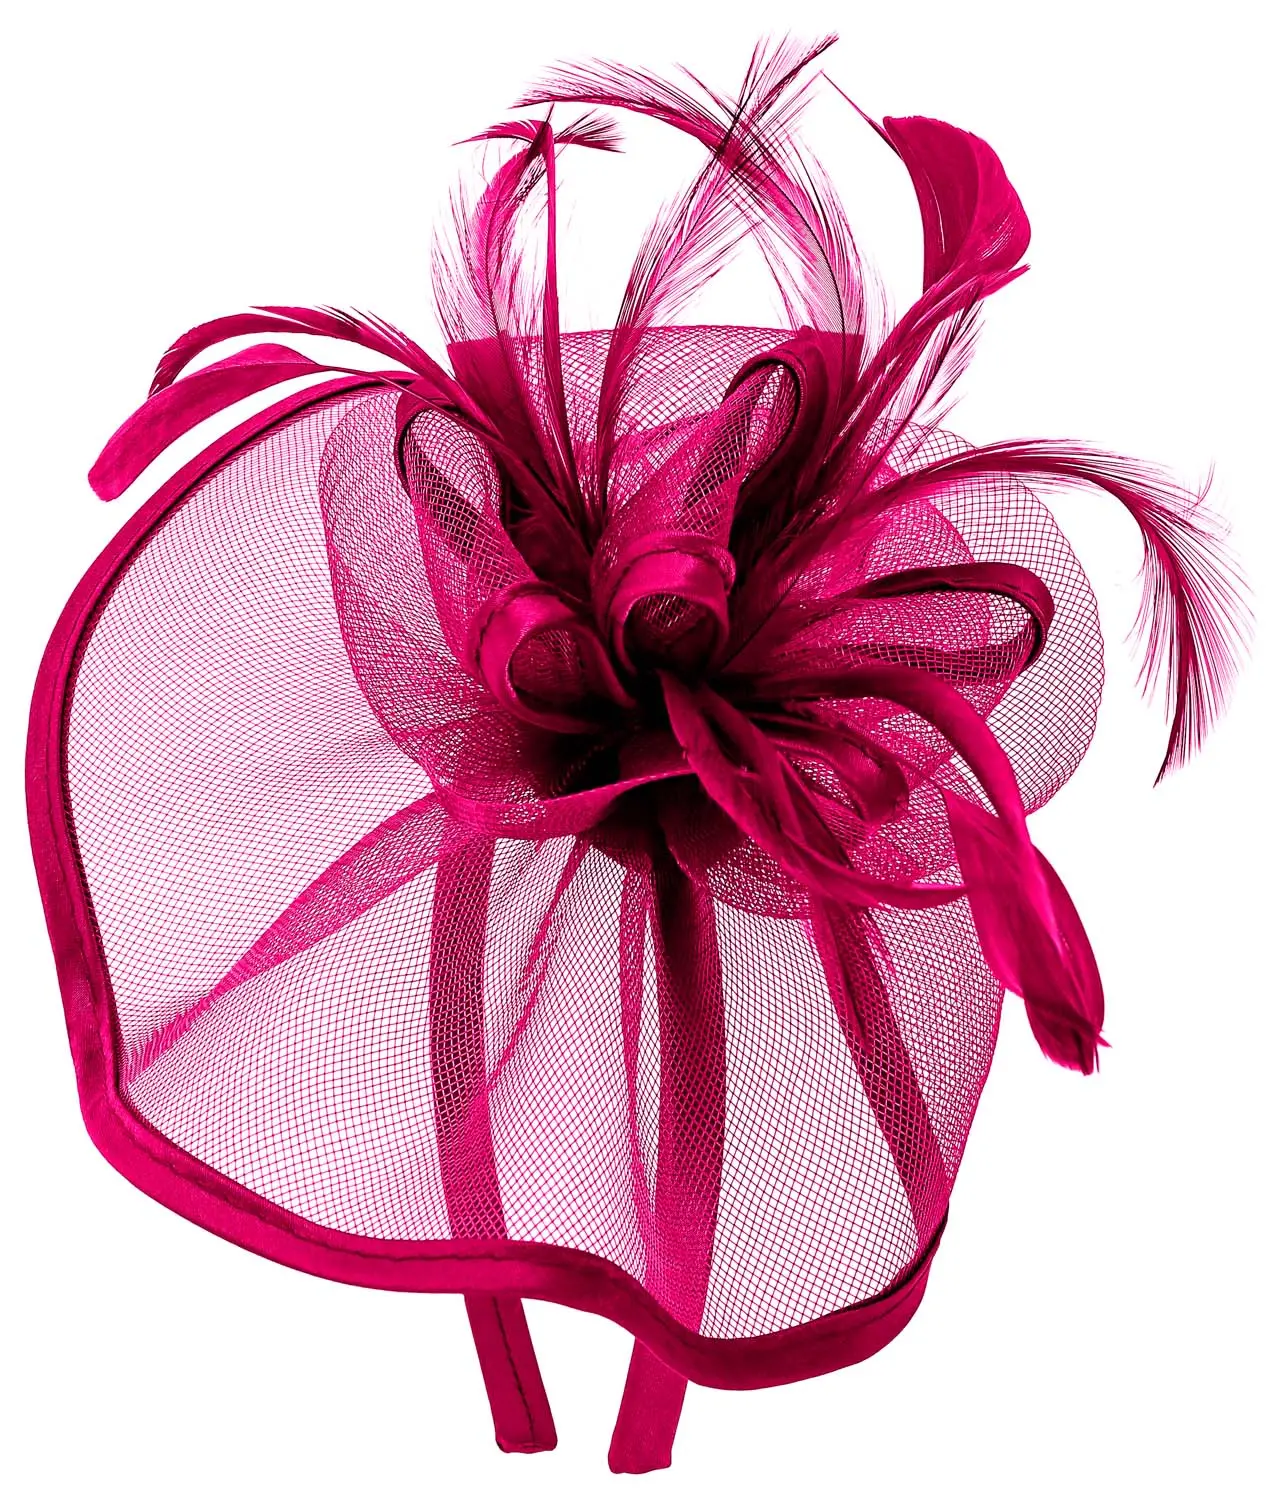 Fascinator - Pink Feathers